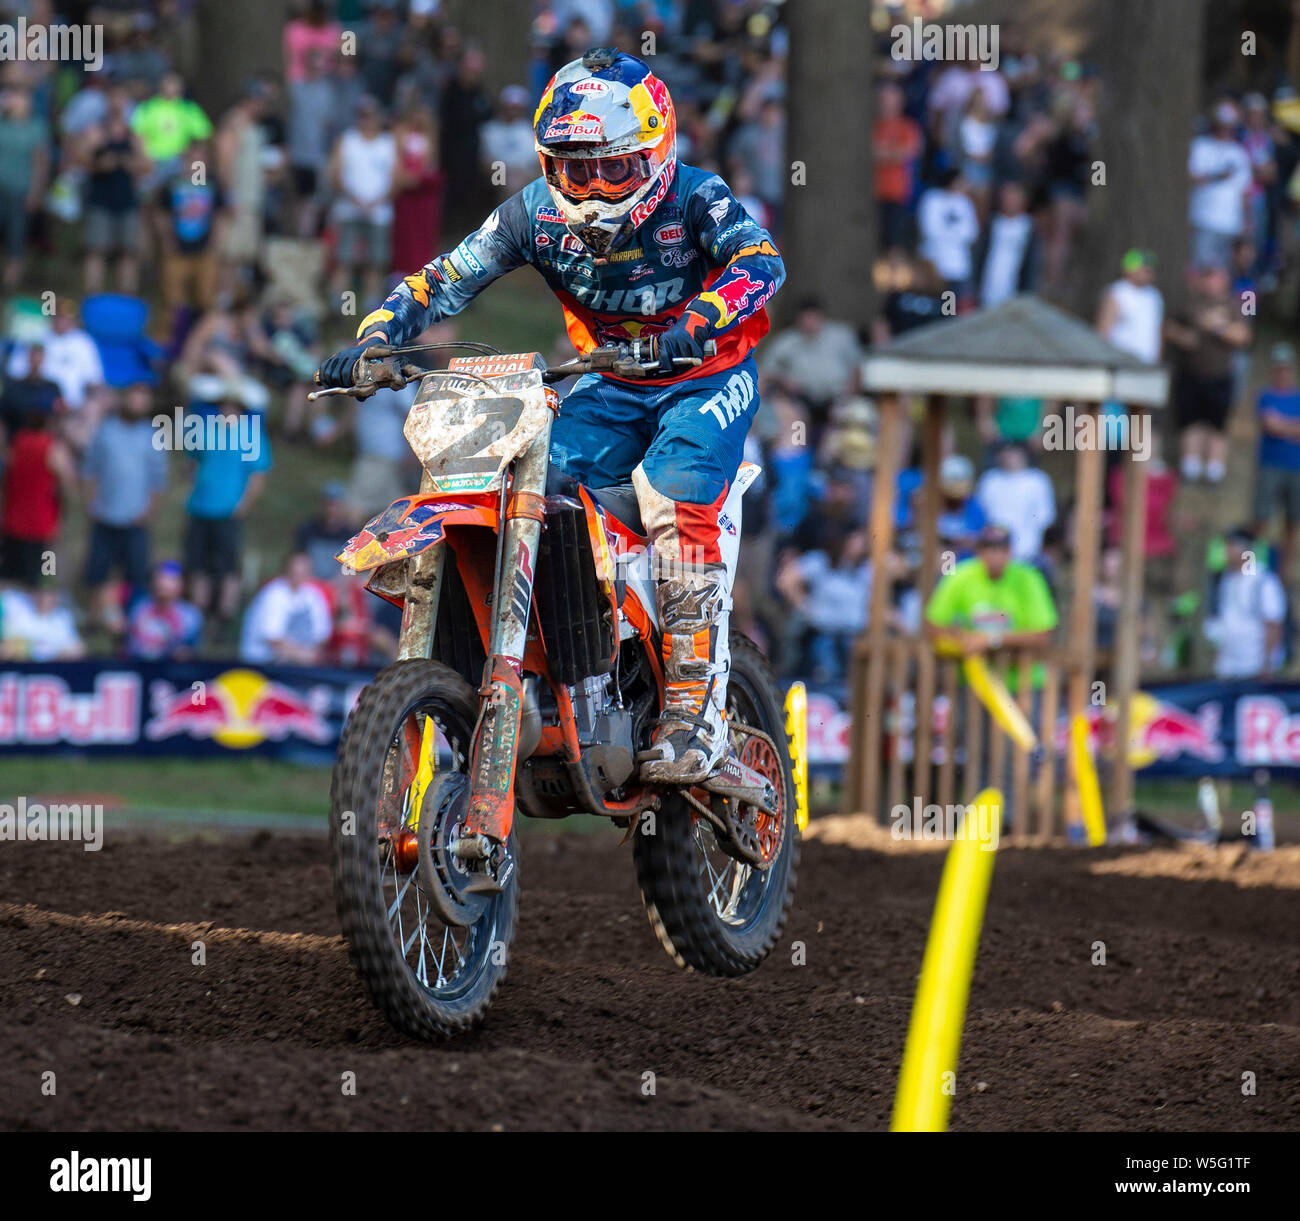 Washougal, WA USA. 27th July, 2019. # 2 Cooper Webb gets air in the rhythm section during the Lucas Oil Pro Motocross Washougal National 450 class championship at Washougal MX park Washougal, WA Thurman James/CSM/Alamy Live News Stock Photo